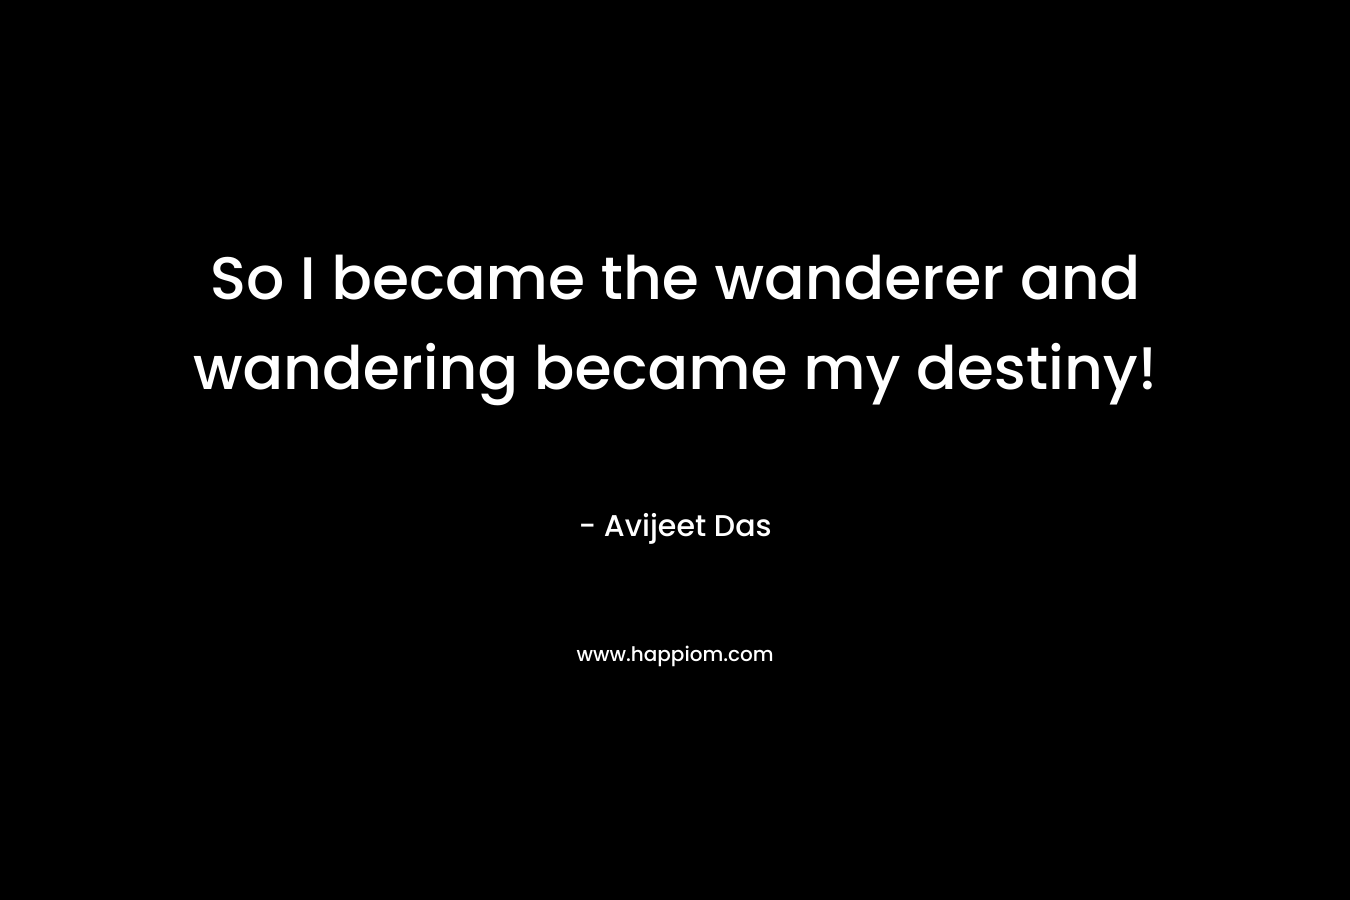 So I became the wanderer and wandering became my destiny!